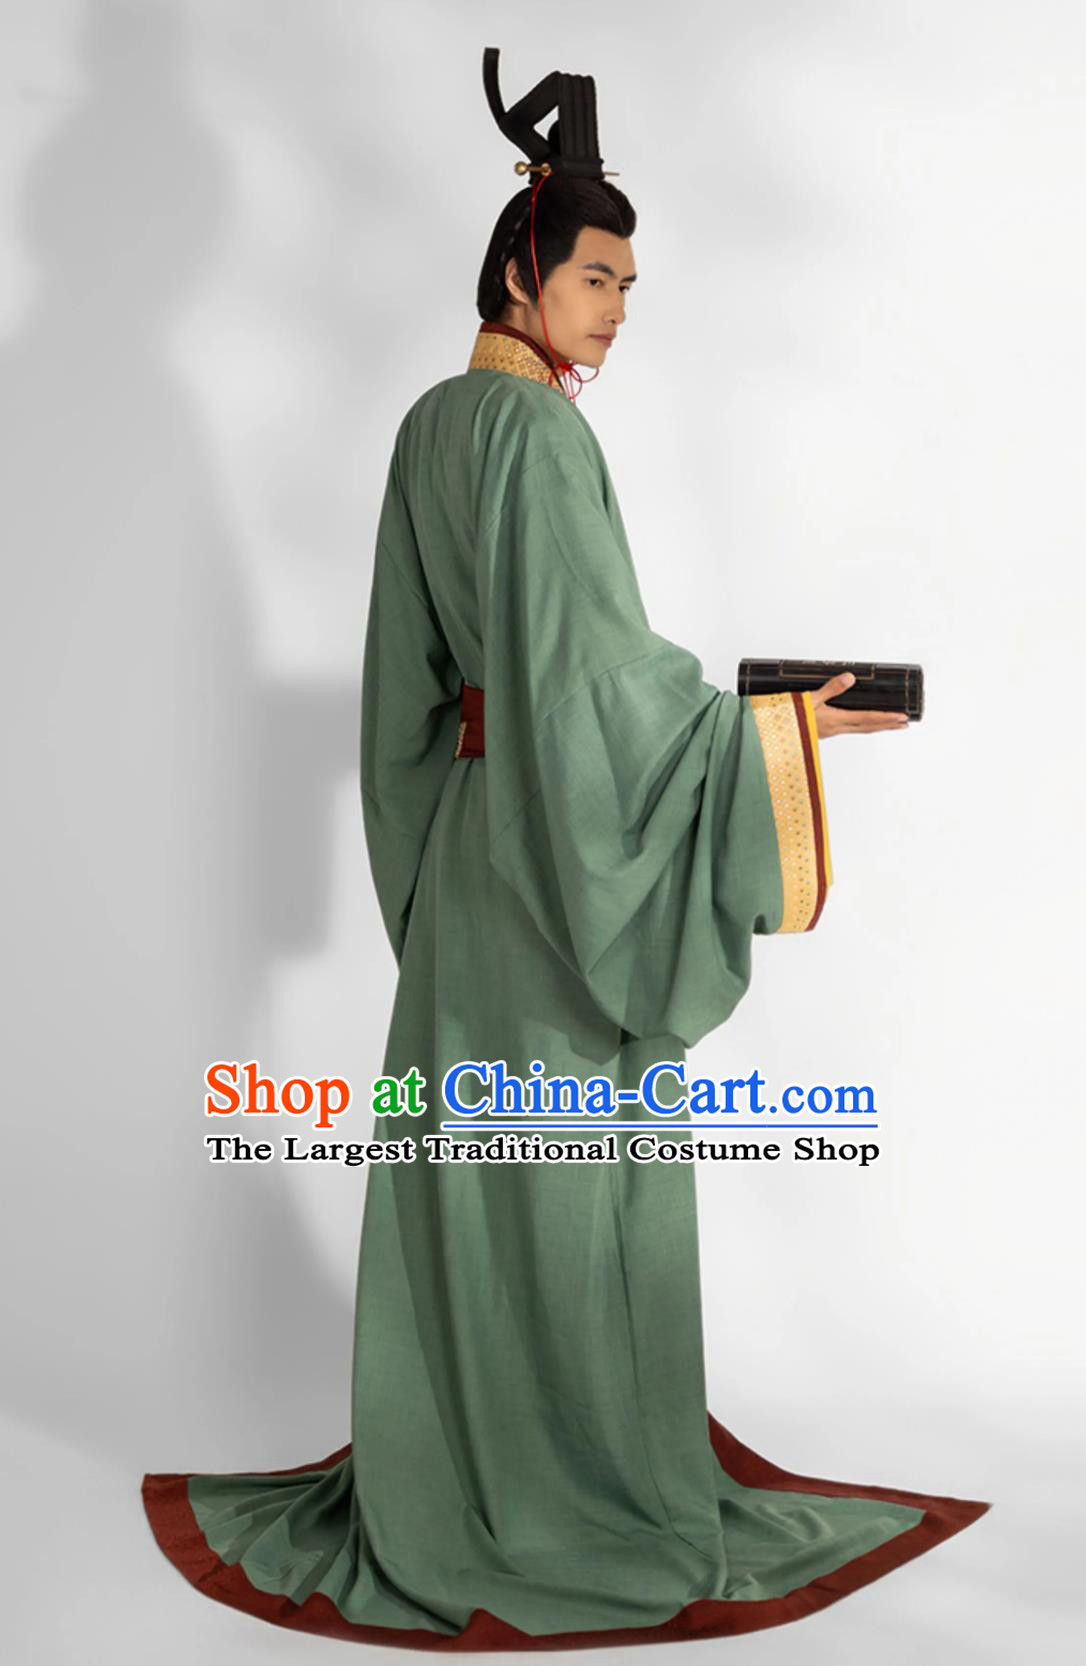 China Travel Photography Costume Ancient Chinese the Warring States Period Prince Clothing Traditional Mens Hanfu Robe